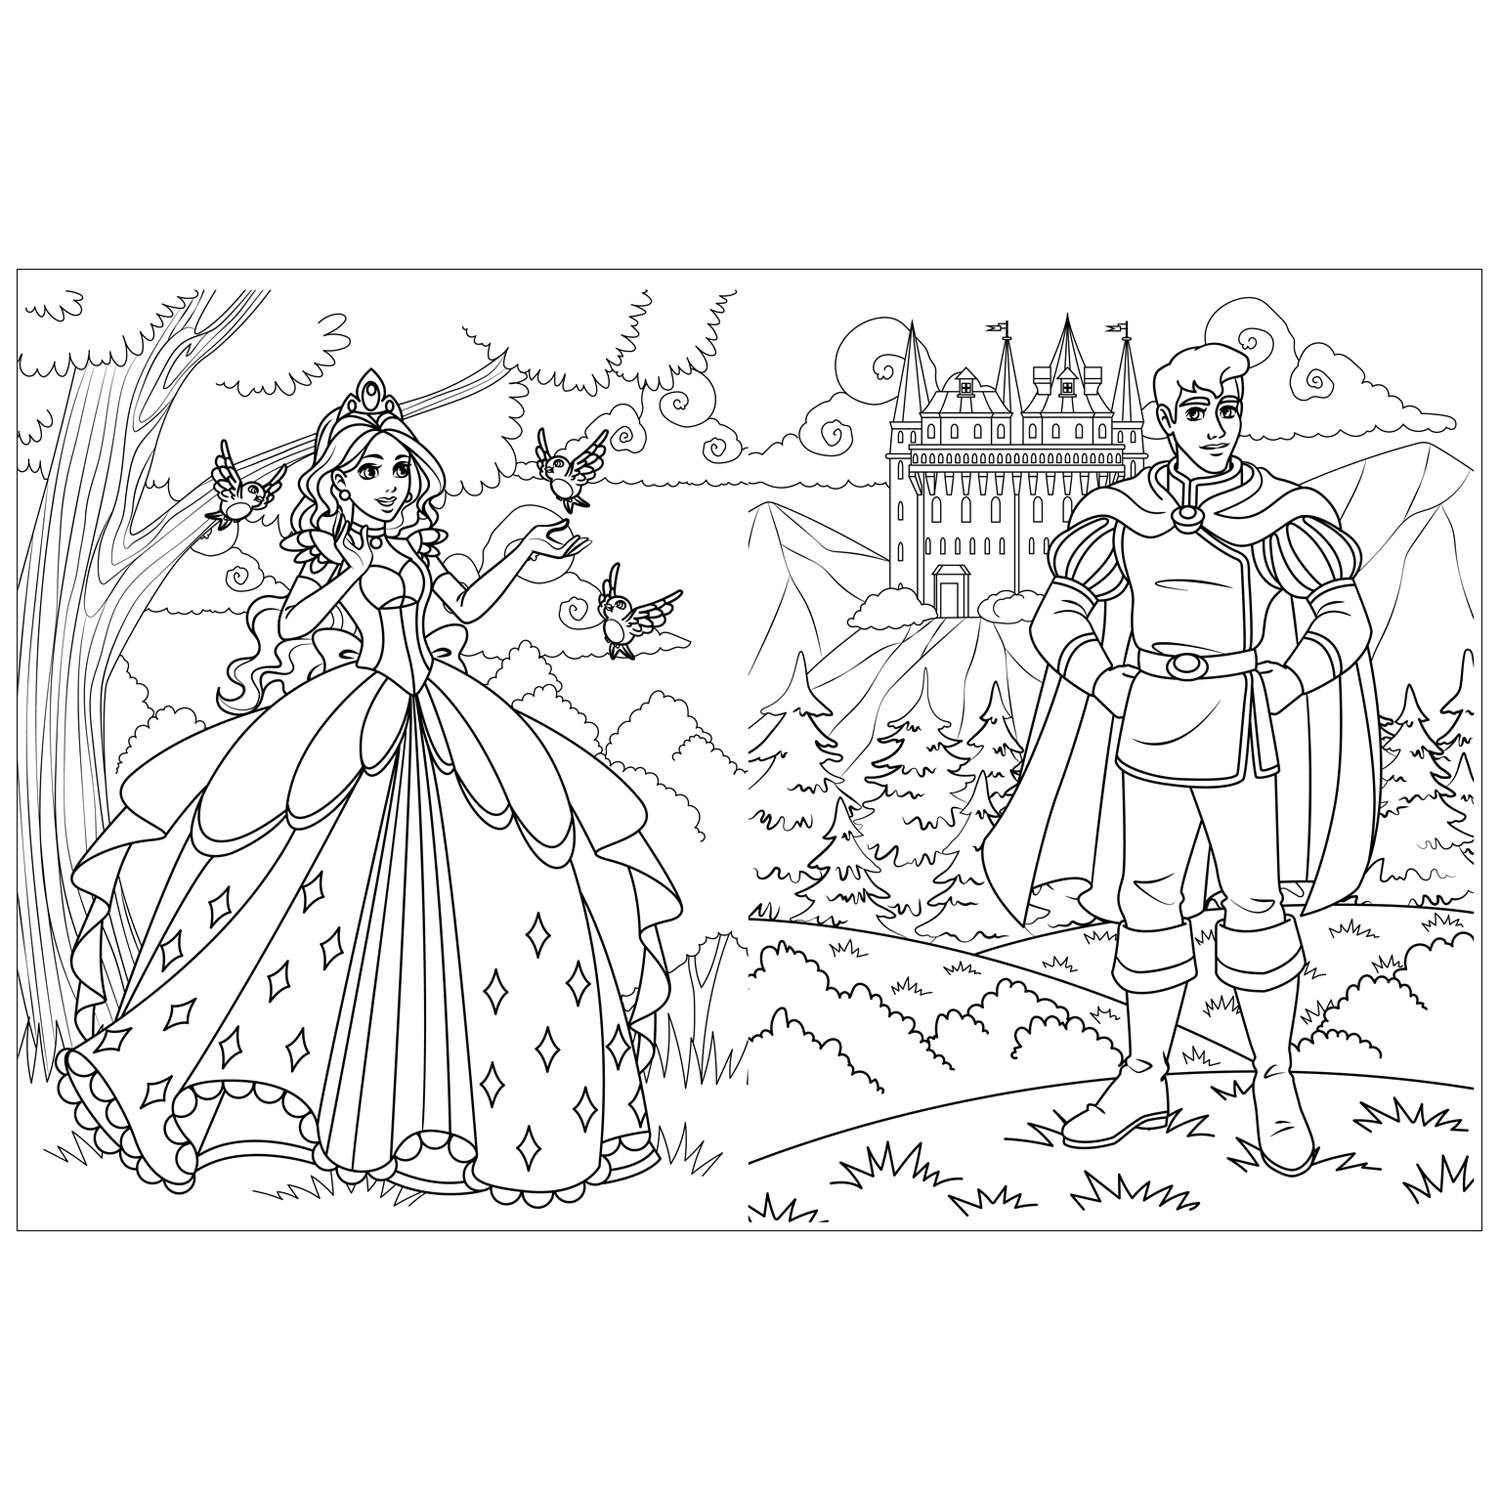 Princess | Simple coloring pages for children 4, 5, 6 years old: 22 coloring pages